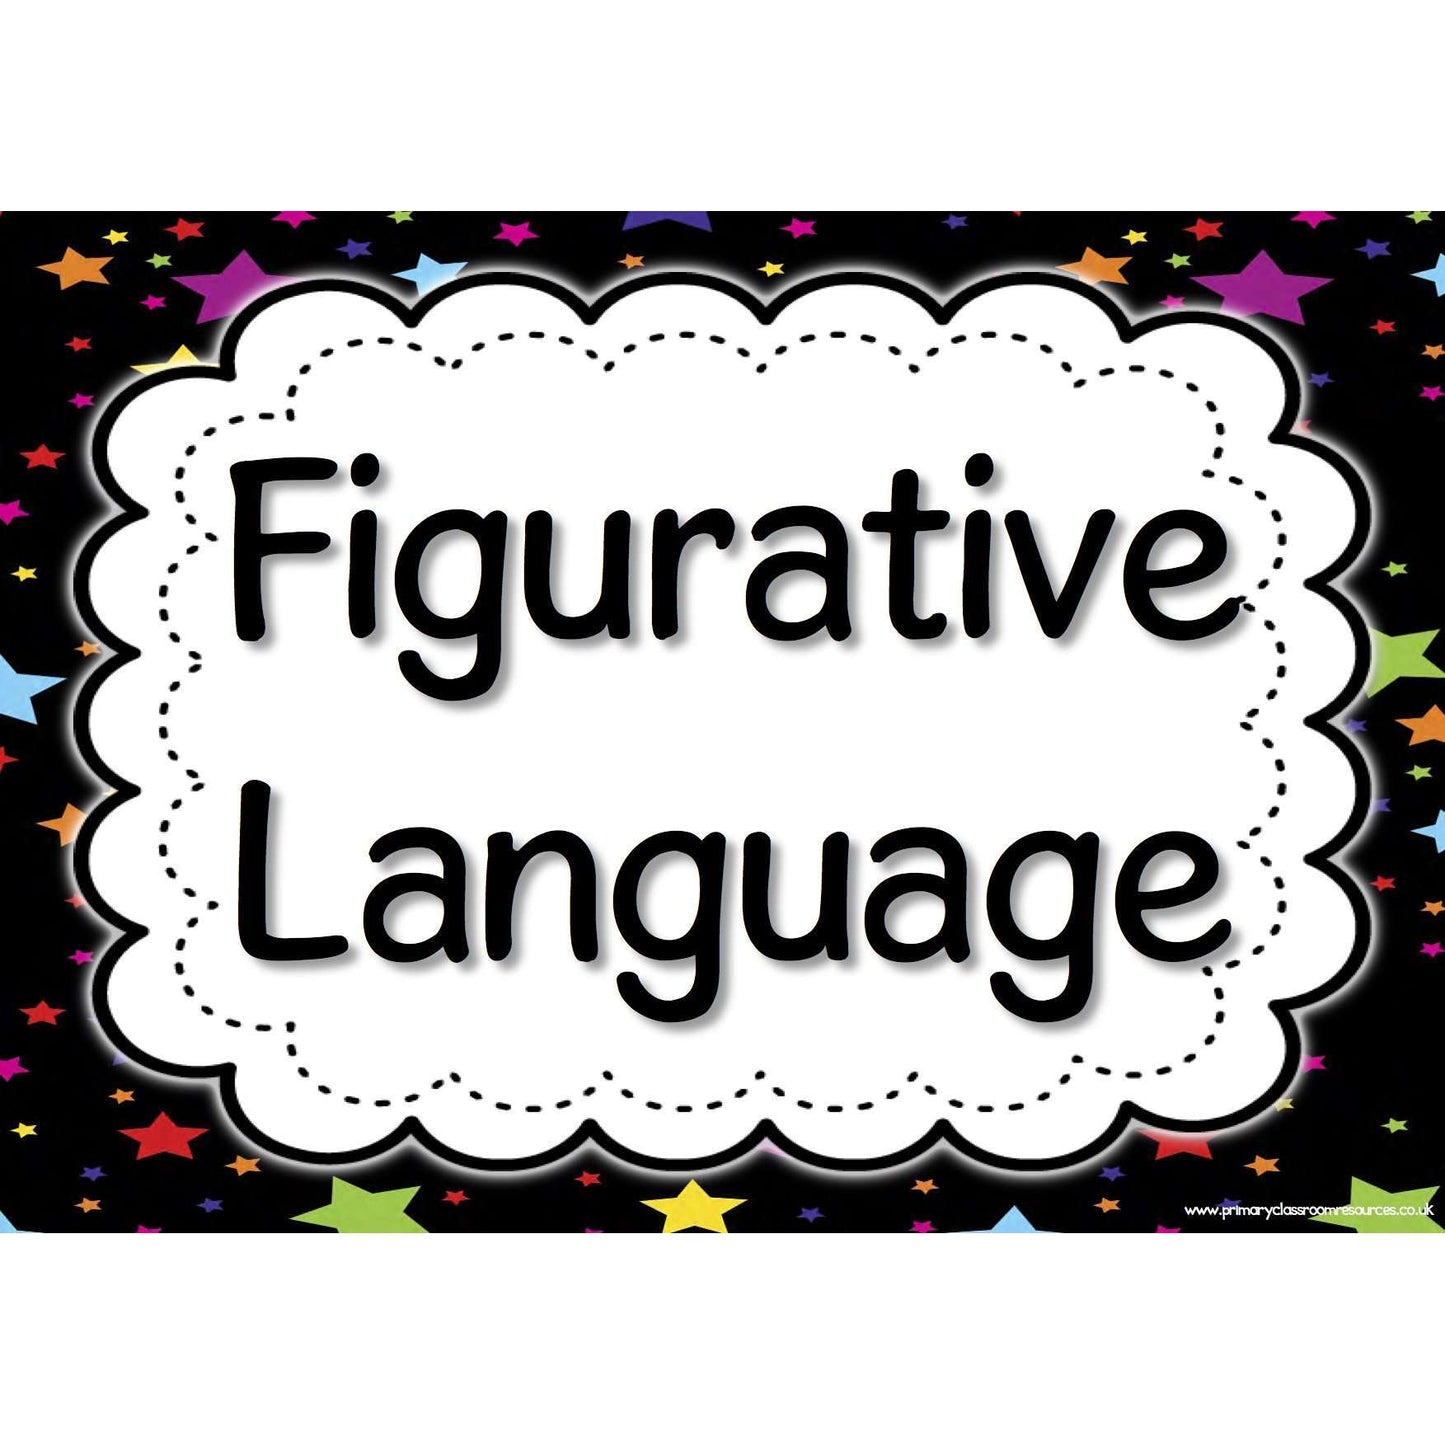 Figurative Language Poster Pack:Primary Classroom Resources